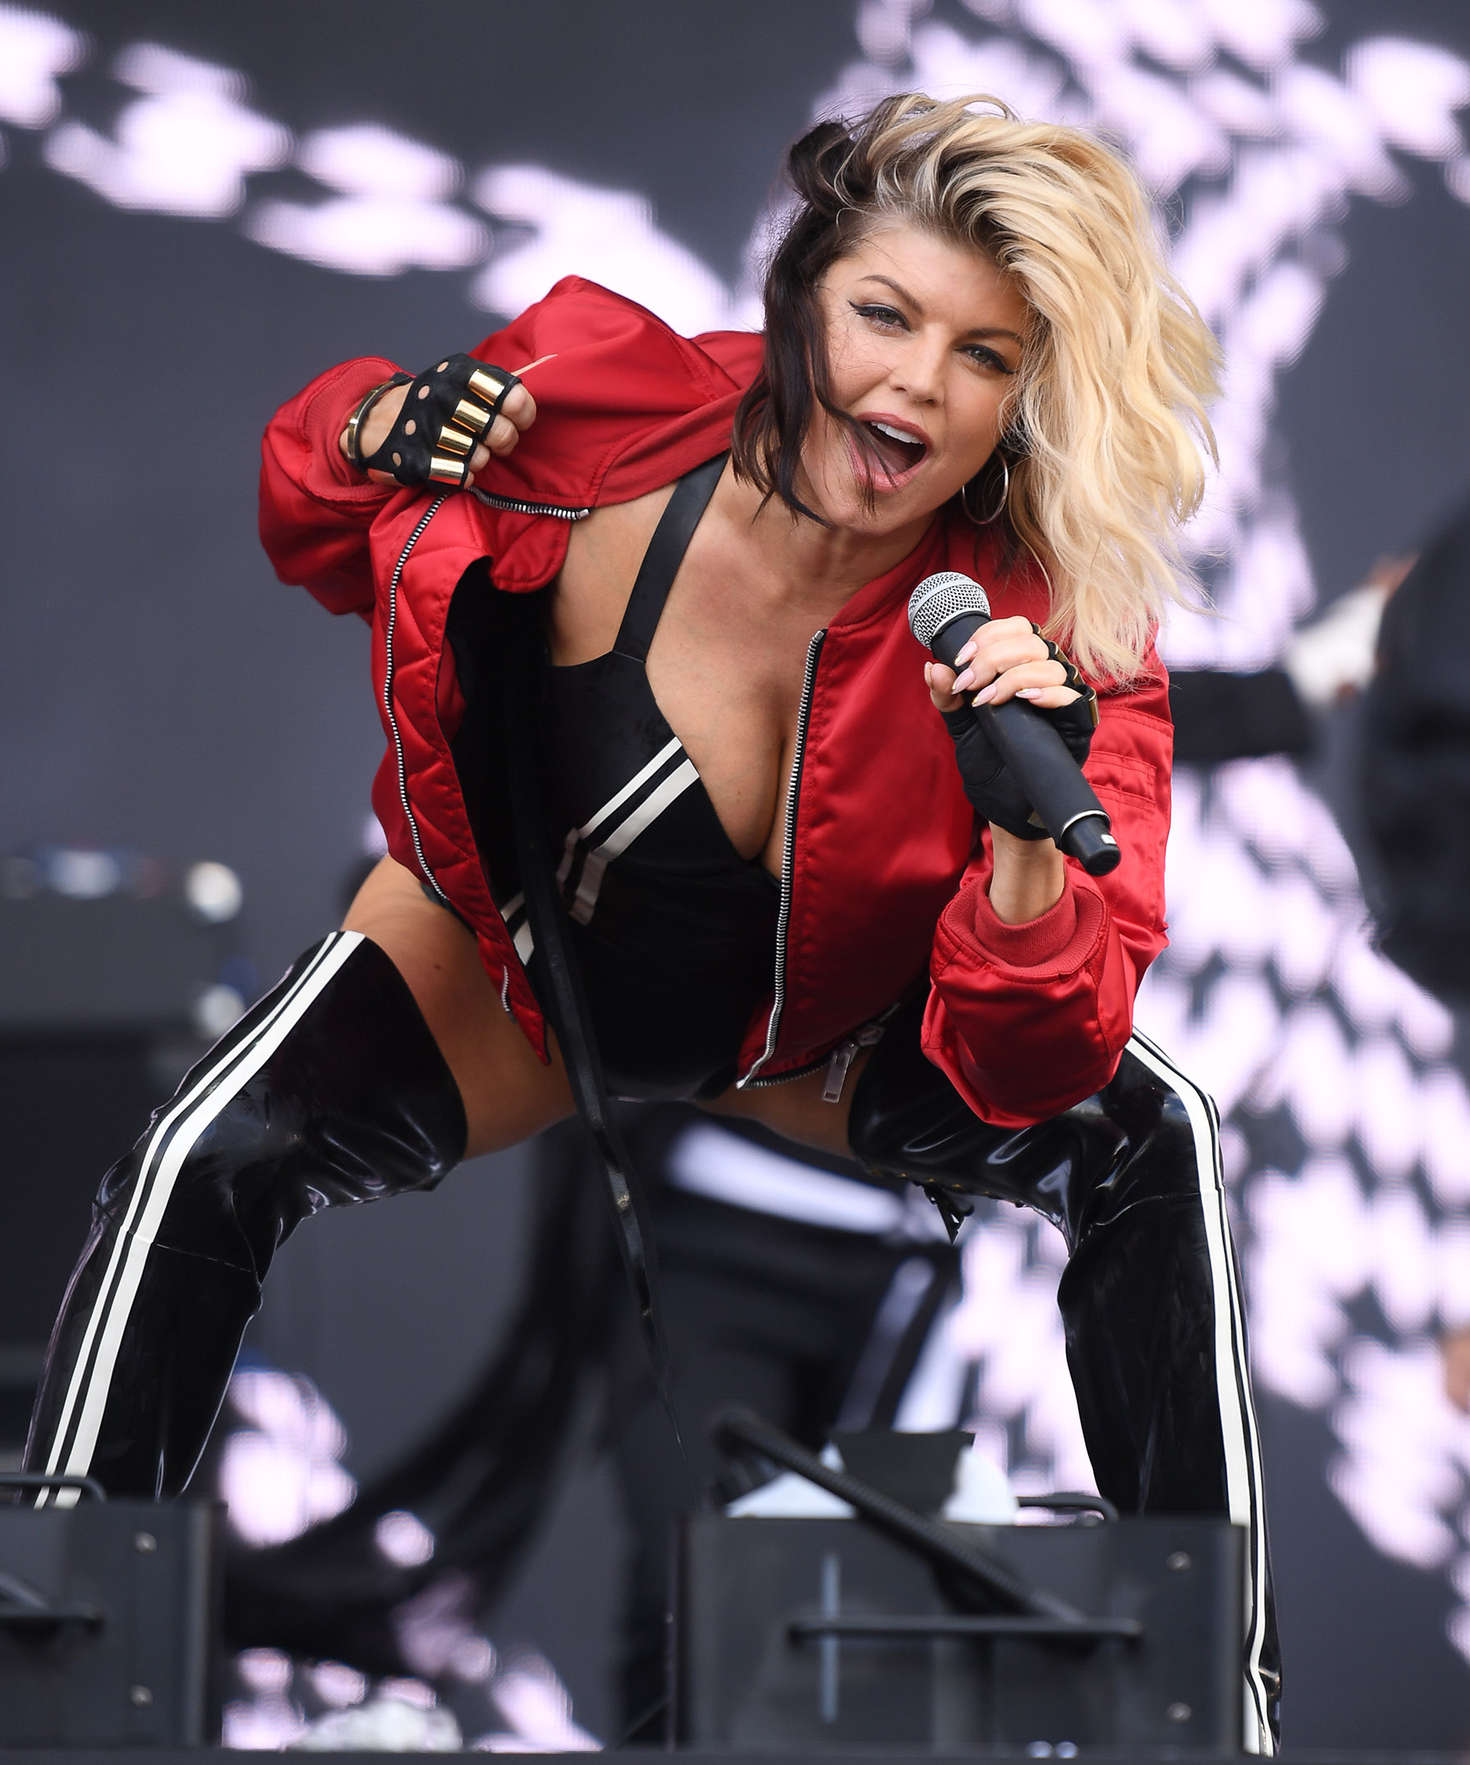 Fergie â€“ Performs at Wireless Festival 2016 in London